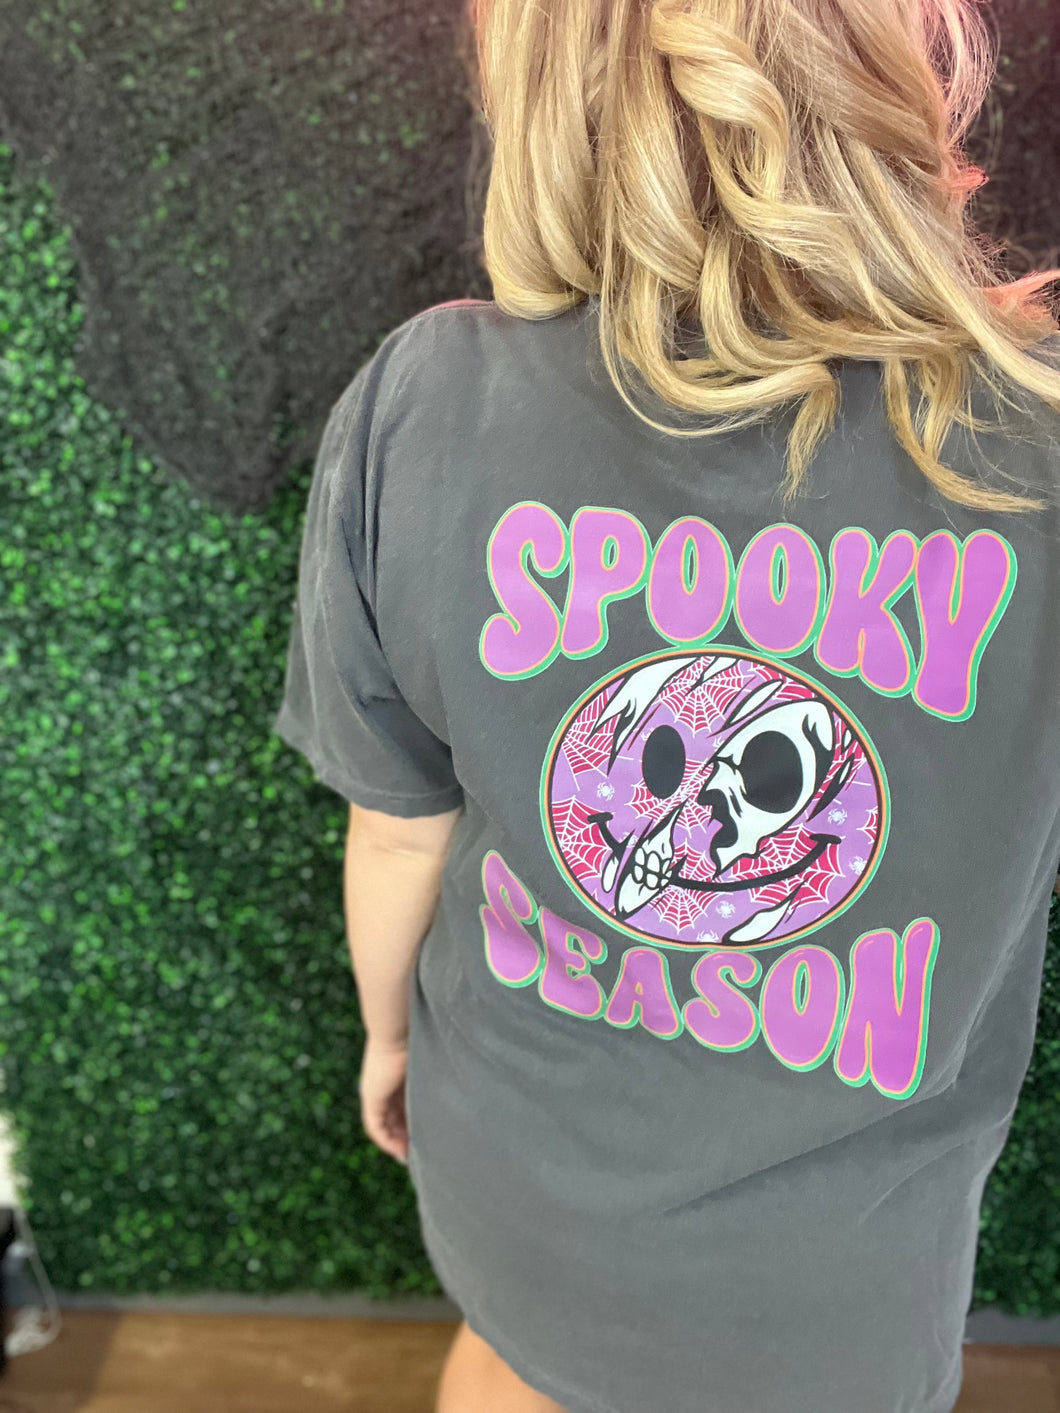 Spooky season front and back tee